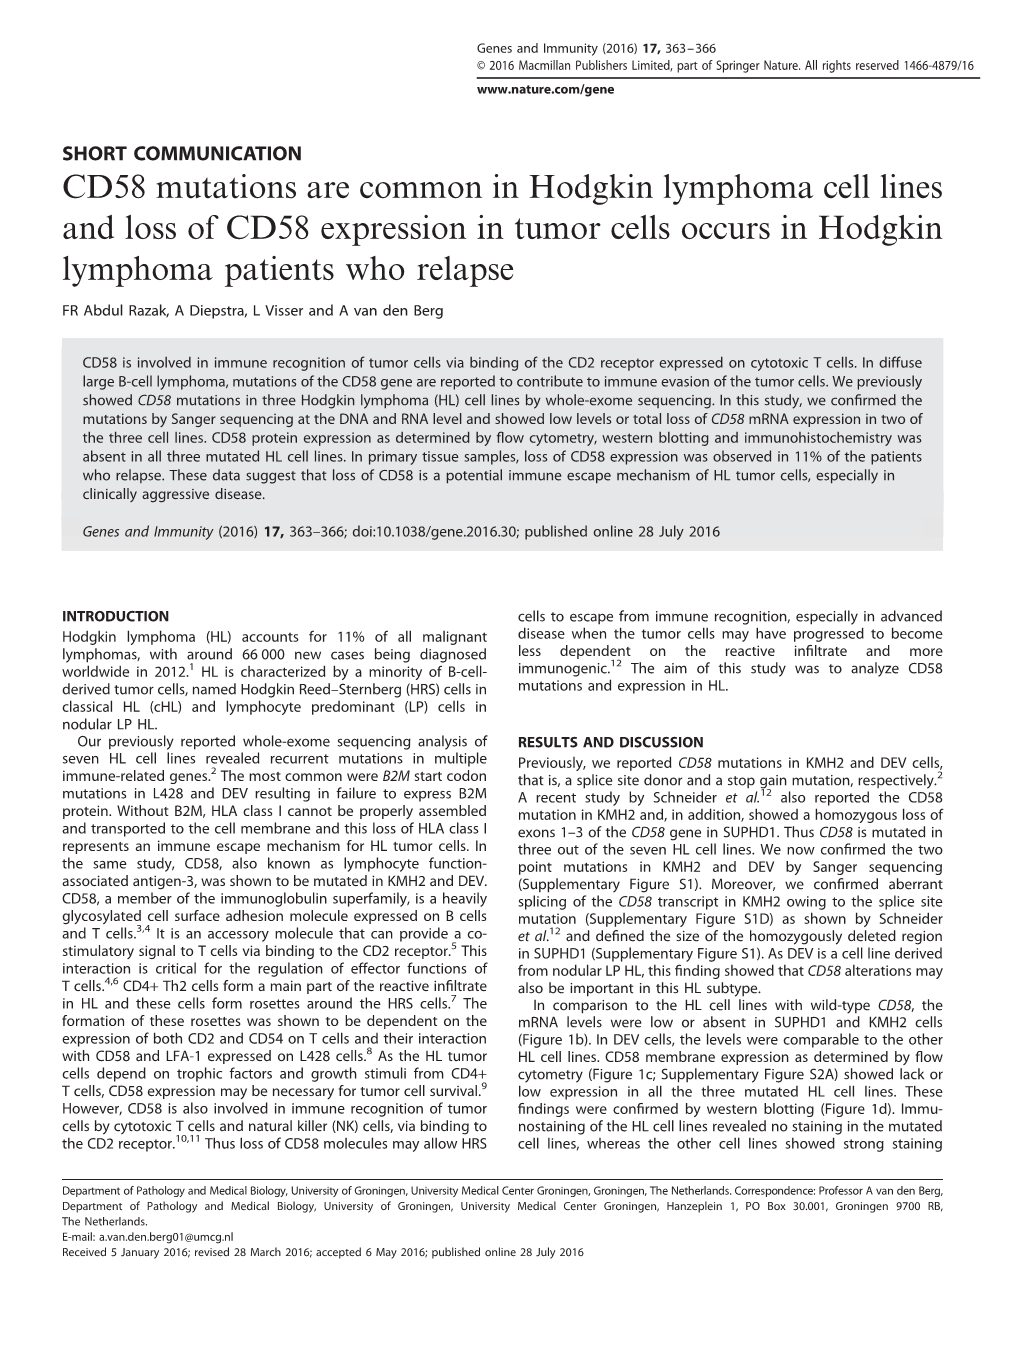 CD58 Mutations Are Common in Hodgkin Lymphoma Cell Lines and Loss of CD58 Expression in Tumor Cells Occurs in Hodgkin Lymphoma Patients Who Relapse